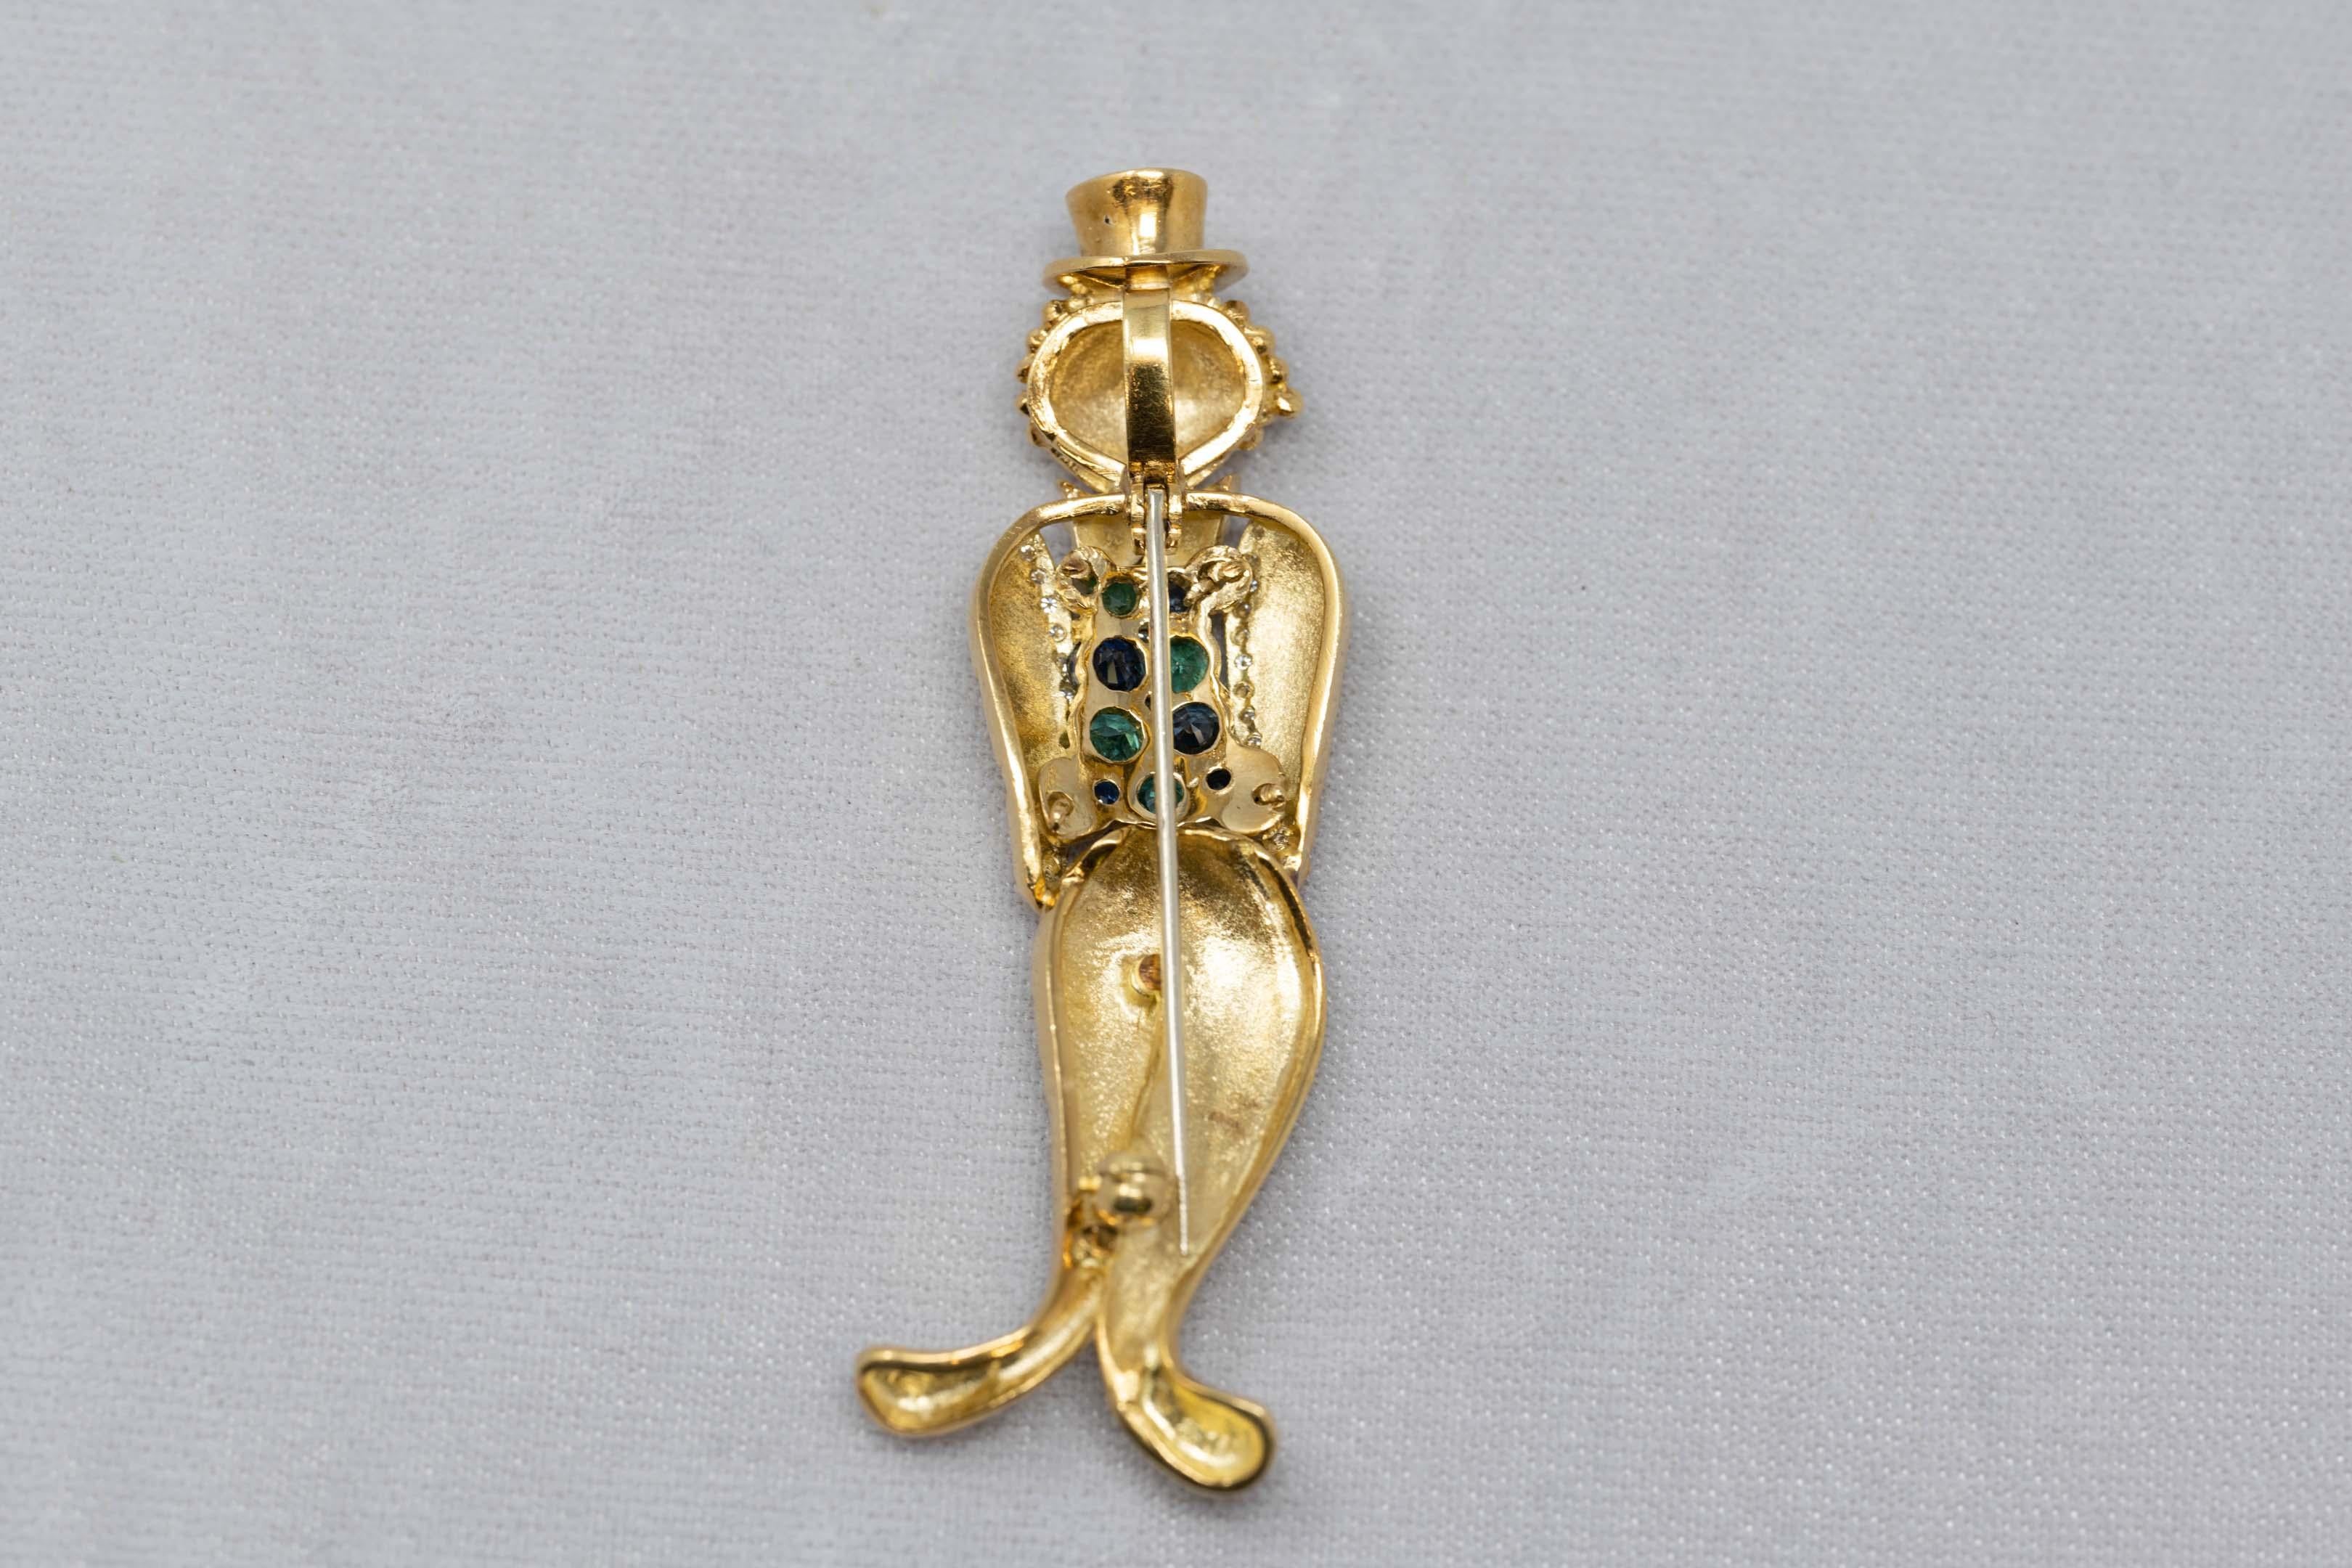 18k yellow gold clown brooch set with 29 diamonds for a total weight of .30ct plus 5 emeralds and 5 sapphires. Measures 2 5/8 inches tall. Stamped 750 and HB for maker mark. Weighs 17 grams.
